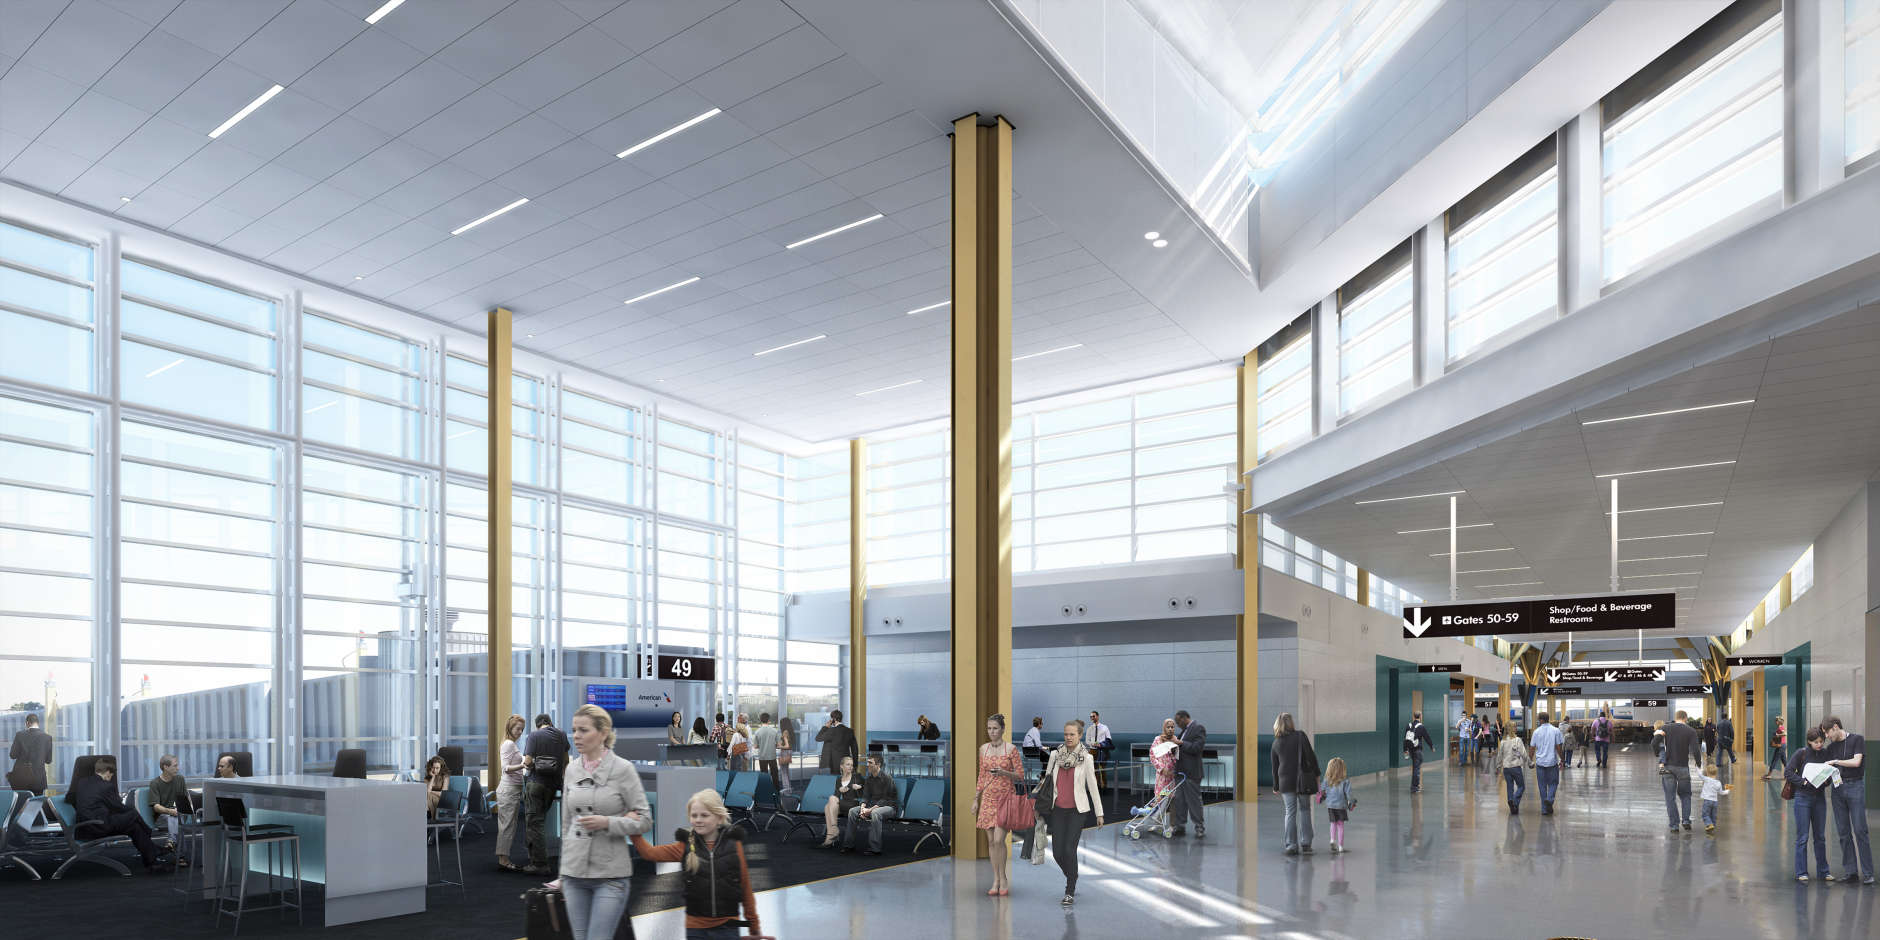 A rendering of the interior of the planned new terminal at Reagan National Airport. (Courtesy MWAA)